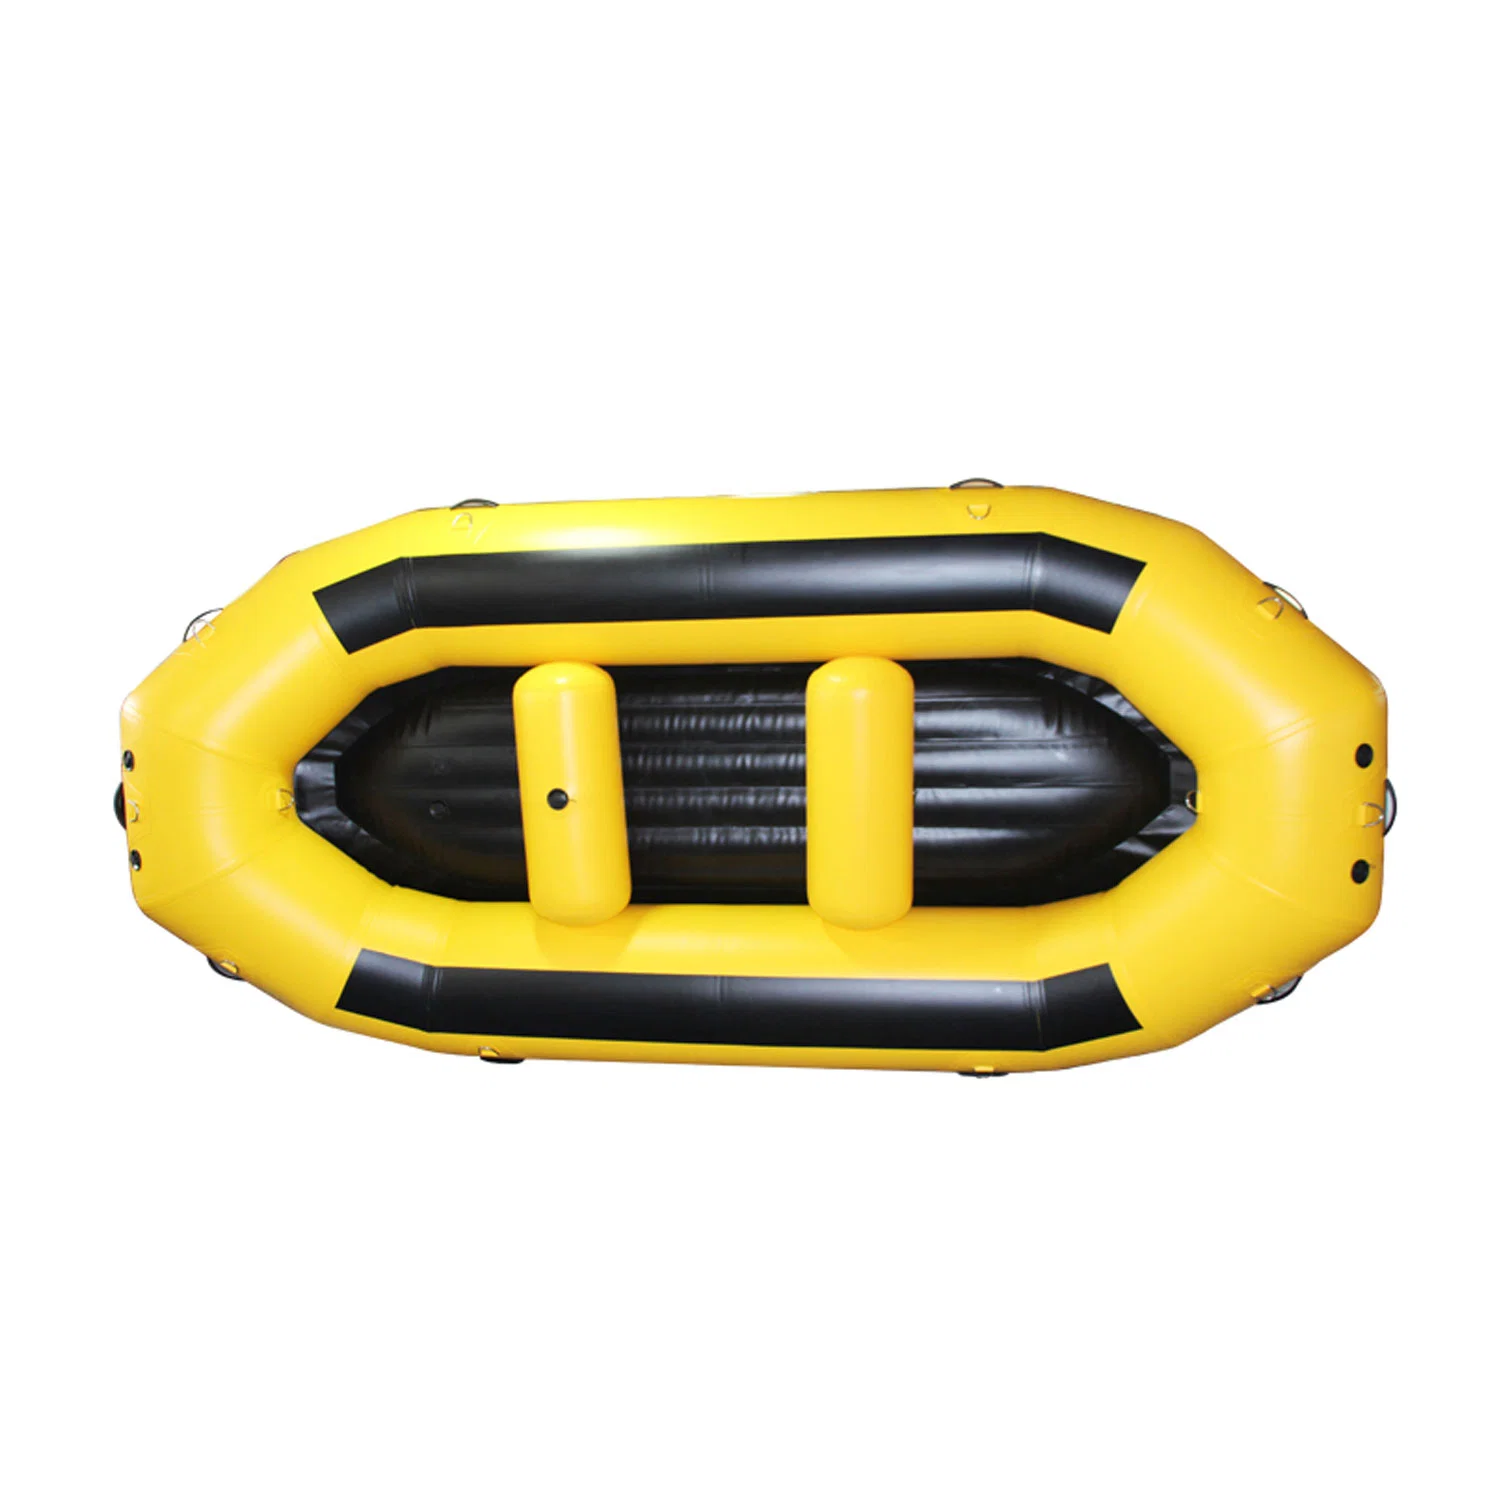 3.6m Inflatable PVC White Water River Rafts Motor/Speed/Fishing Boat